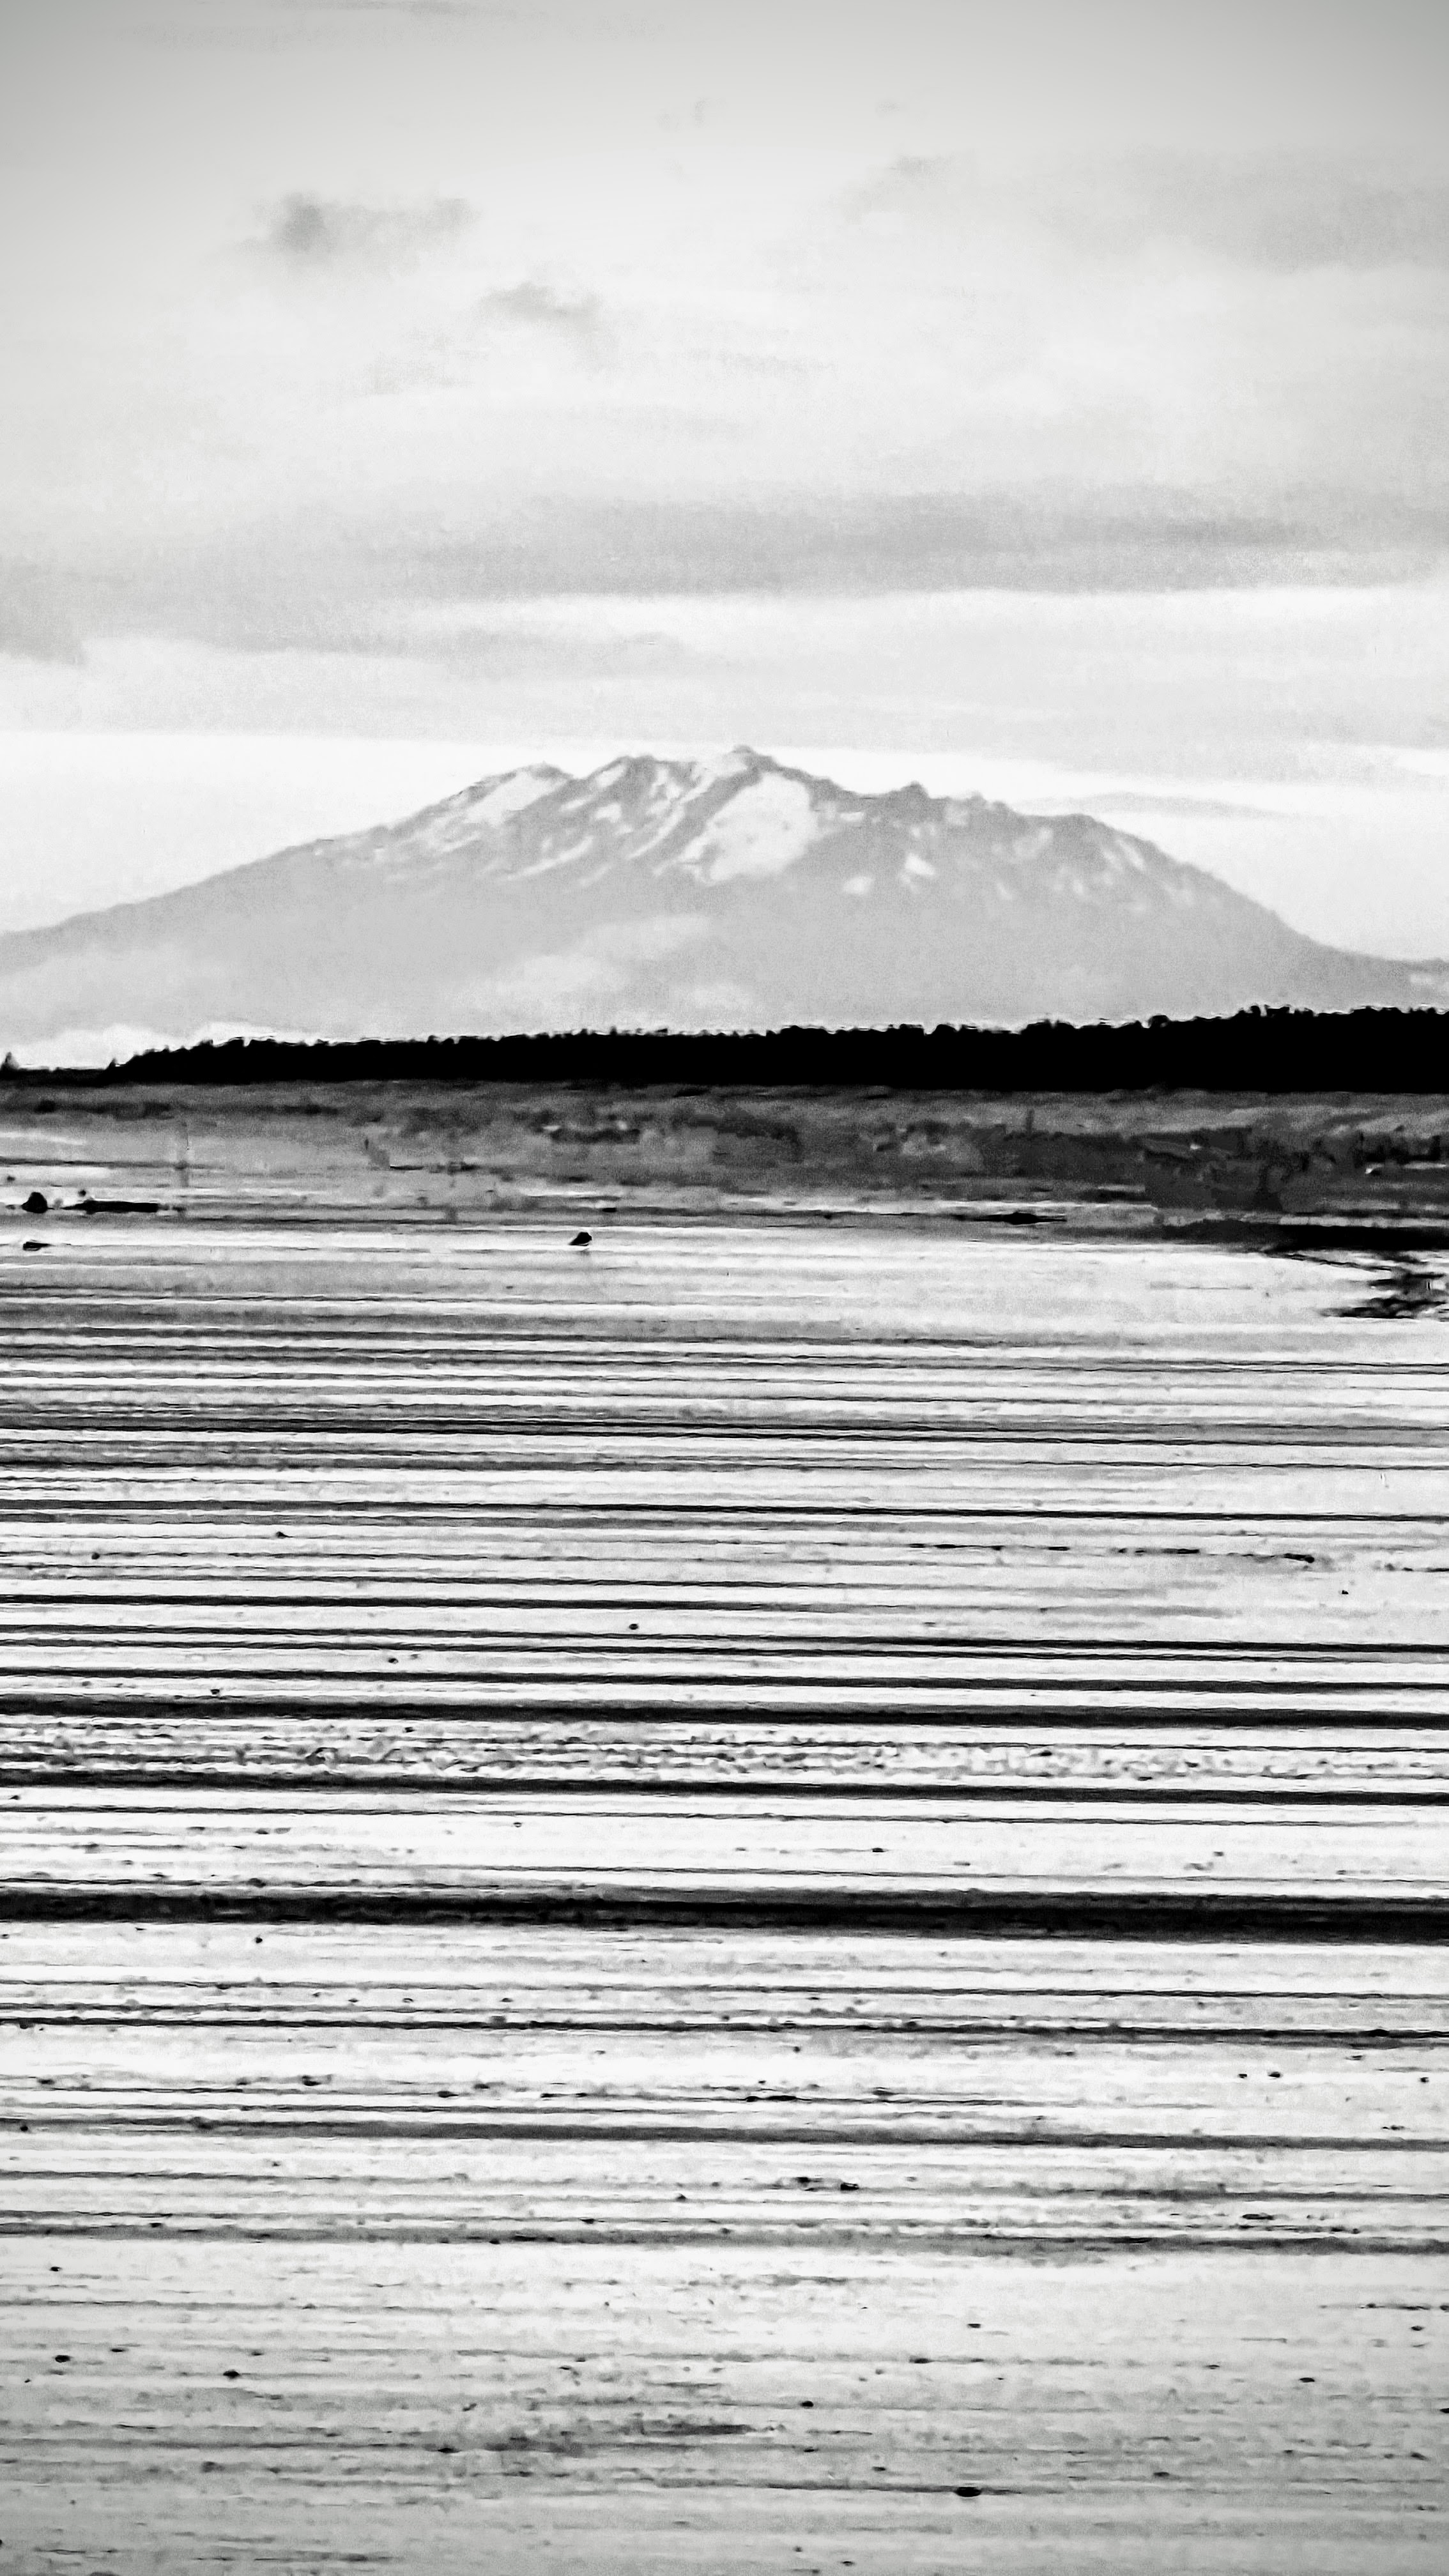 Black and white version of a photograph showing a beach in the foreground and a large snow topped volcano in the distance.